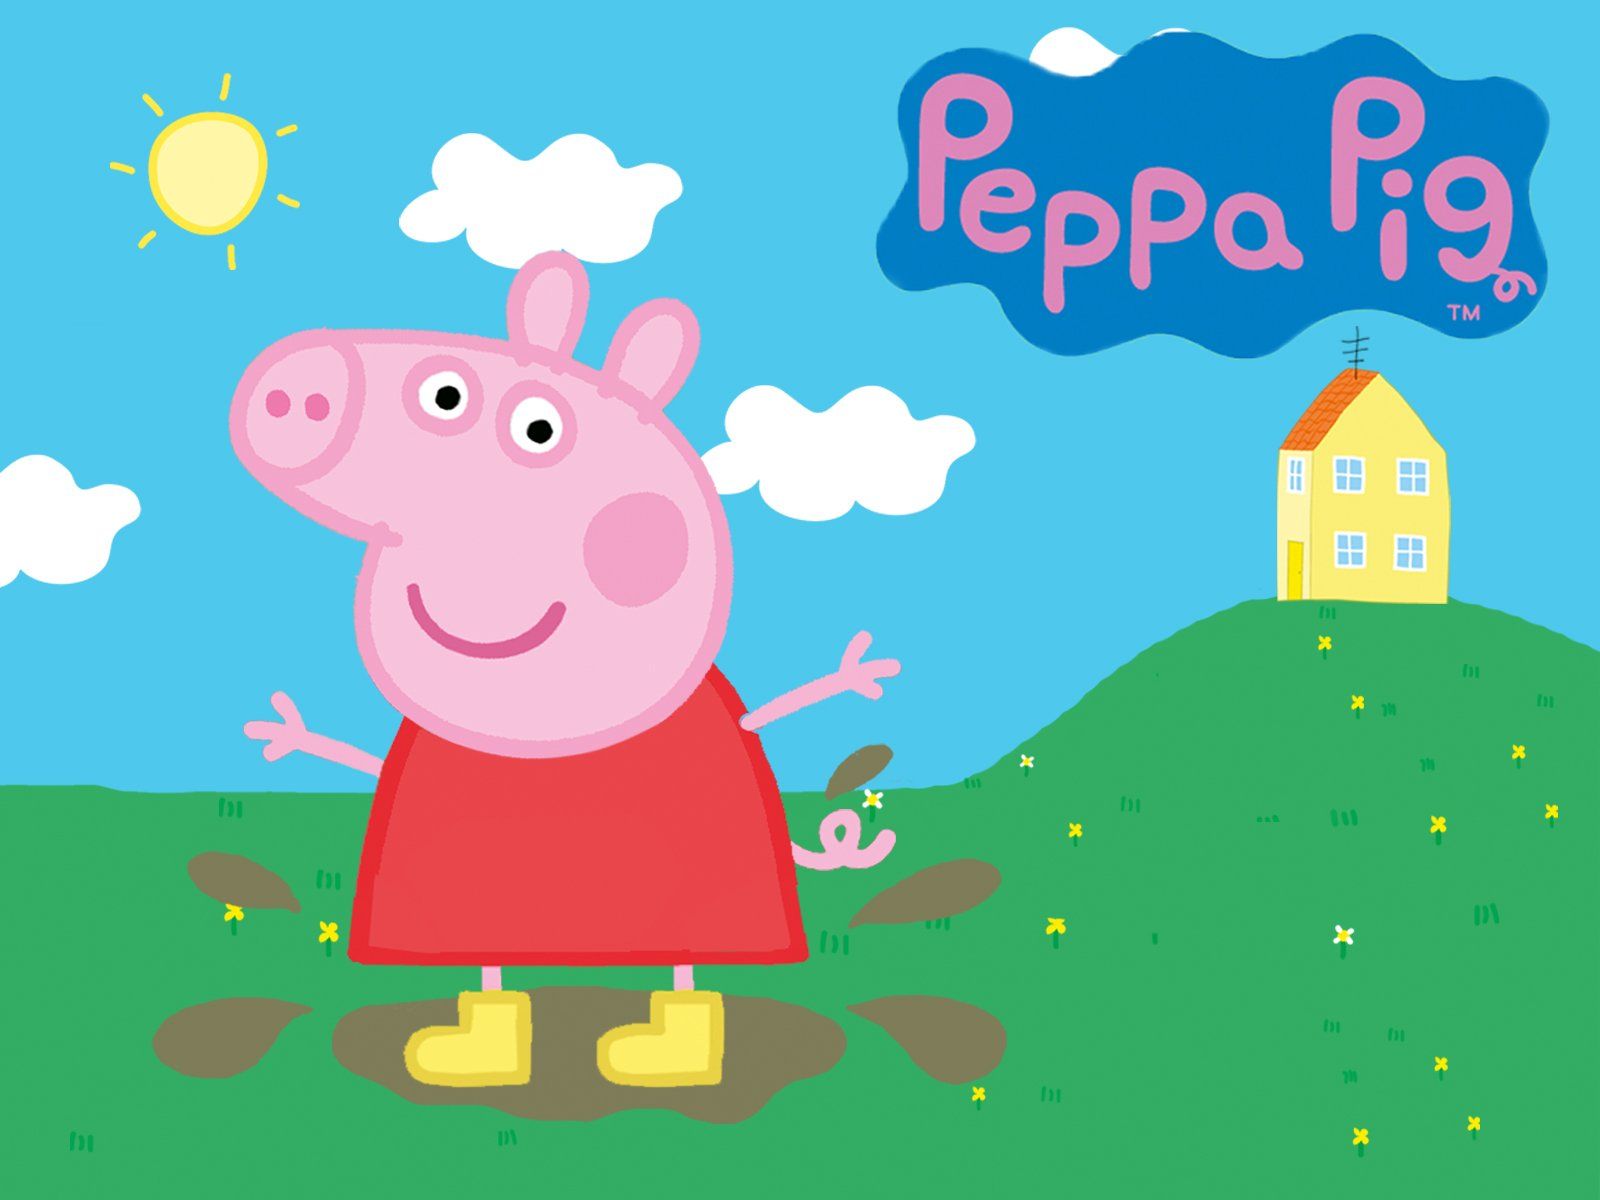 500 Peppa Pig House Wallpapers  Background Beautiful Best Available For  Download Peppa Pig House Images Free On Zicxacomphotos  Zicxa Photos